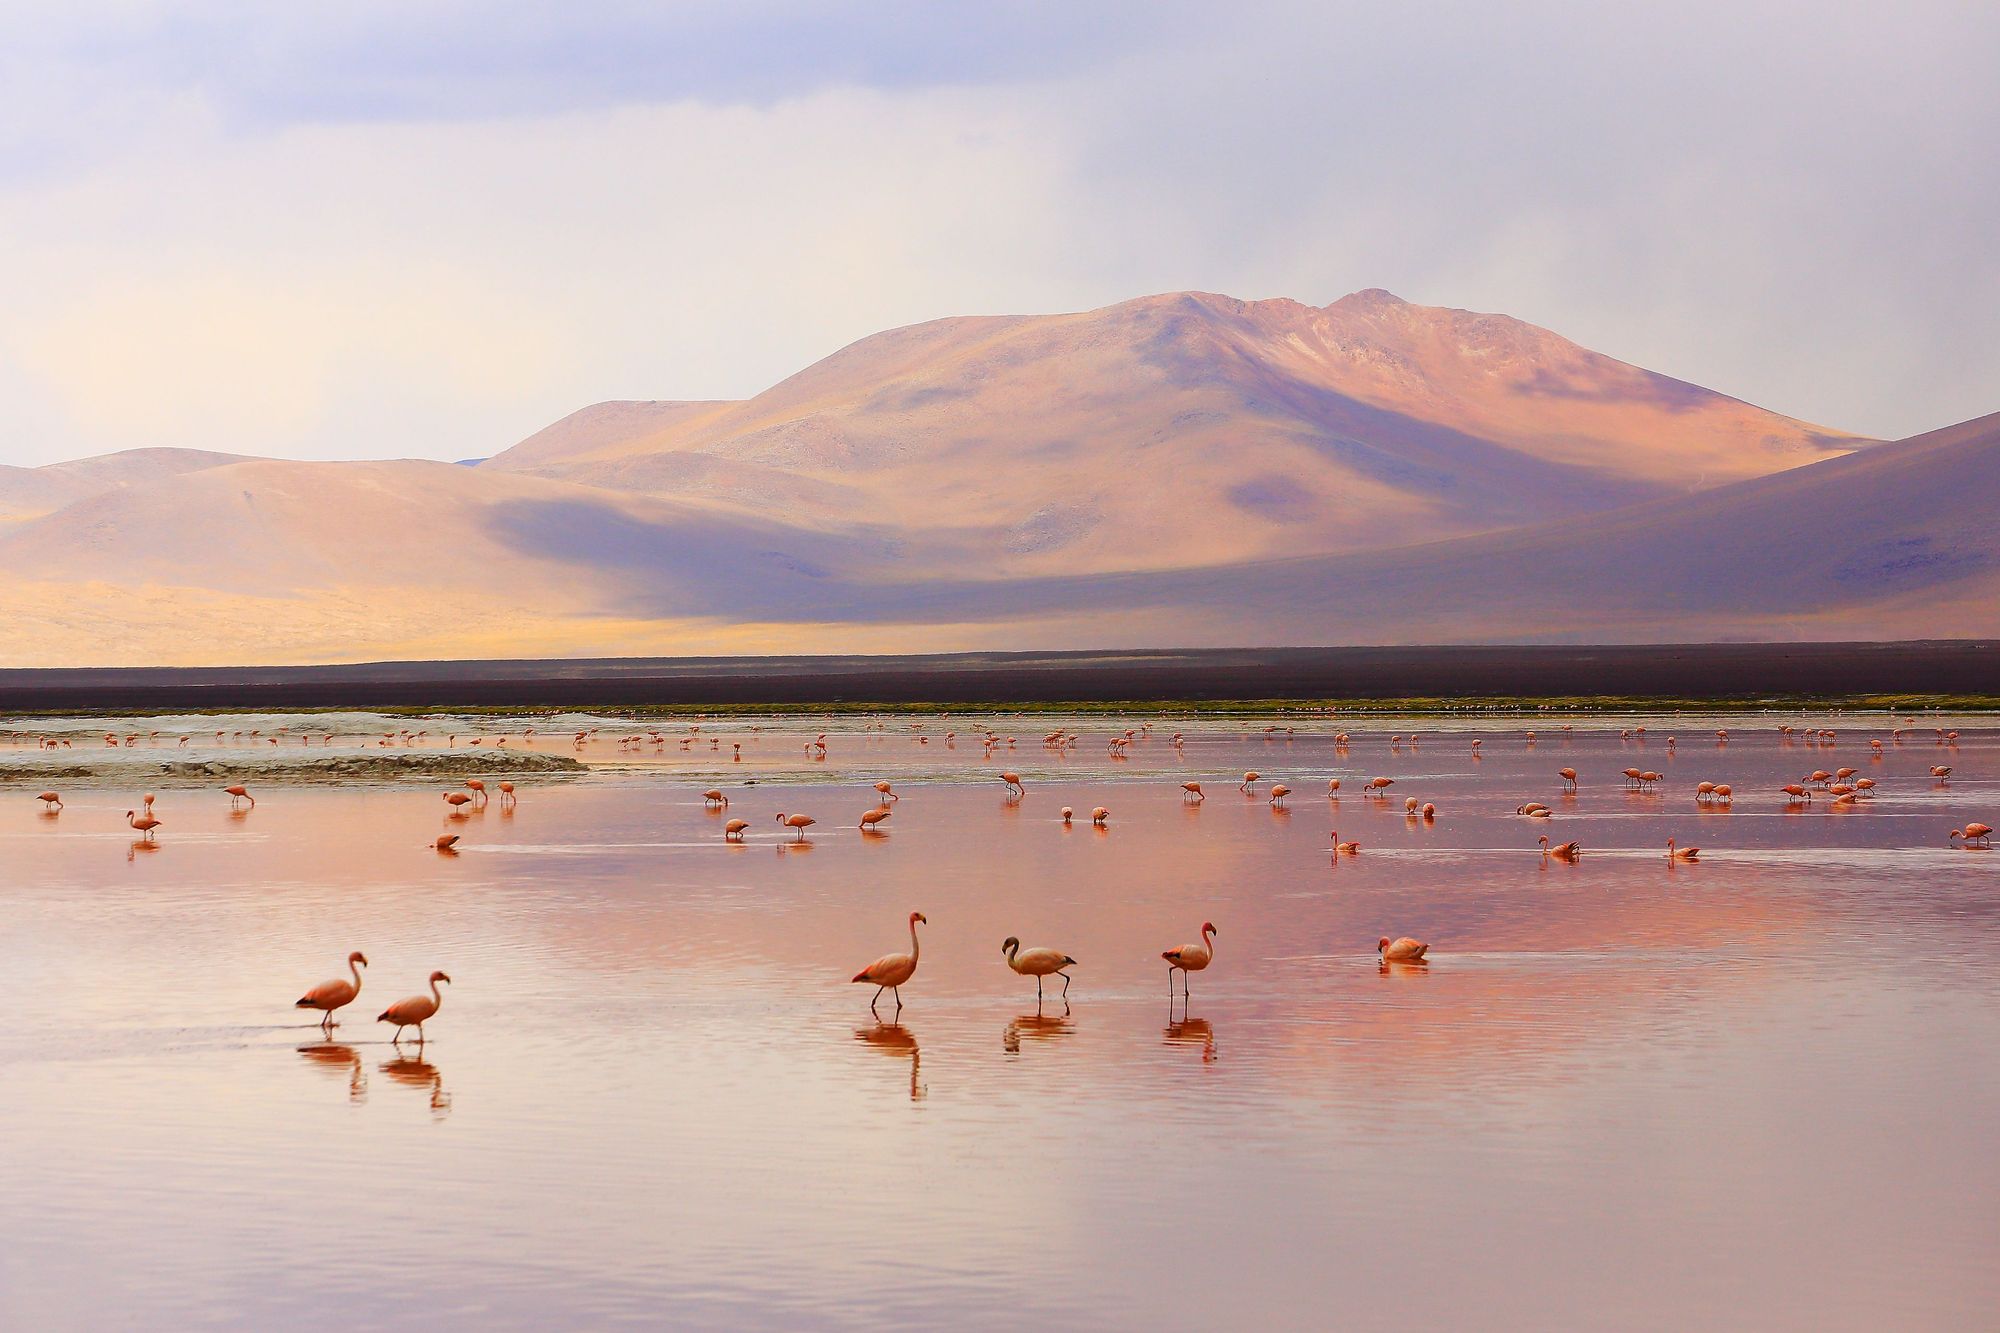 A flock of flamingos wading a lake on the Altiplano, a high altitude area in South America. Photo: Getty